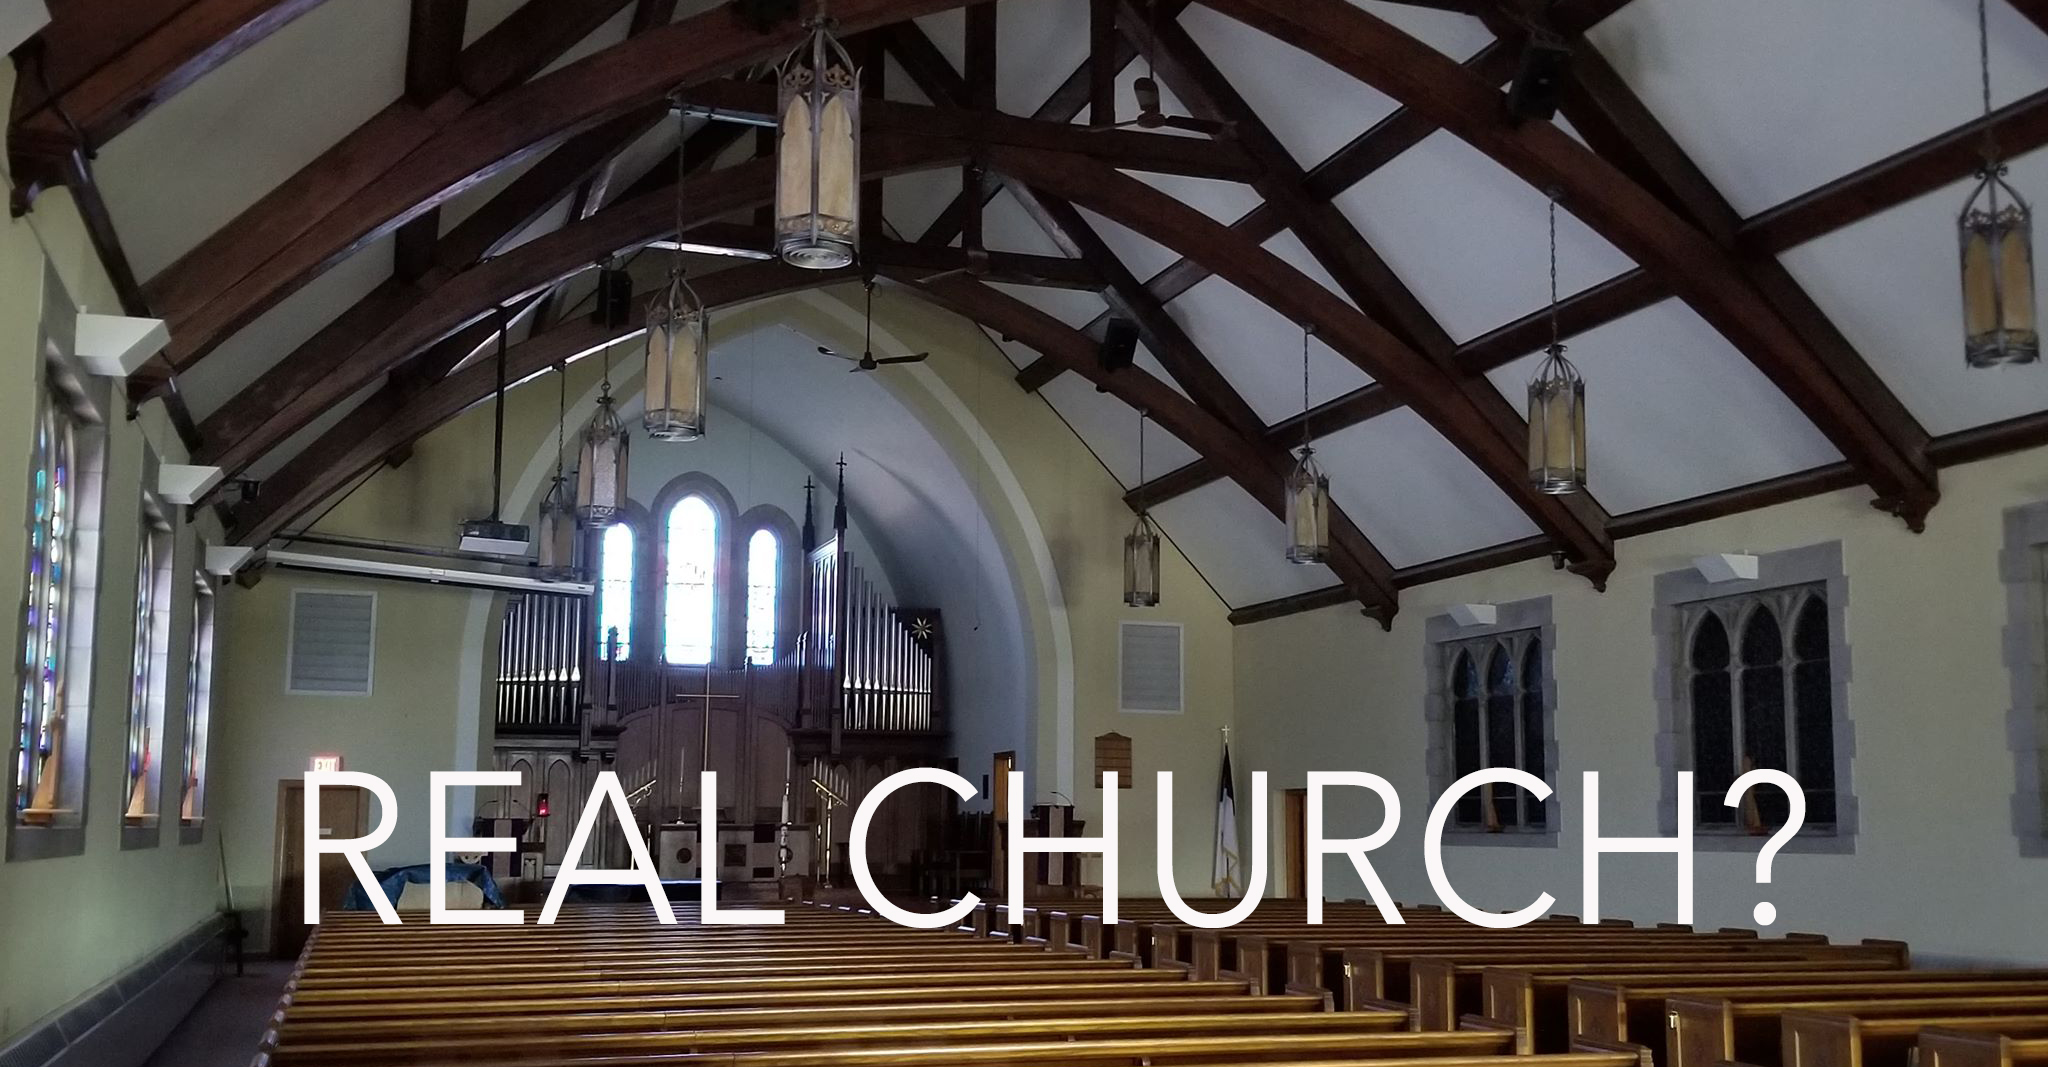 When will be have Real Church?